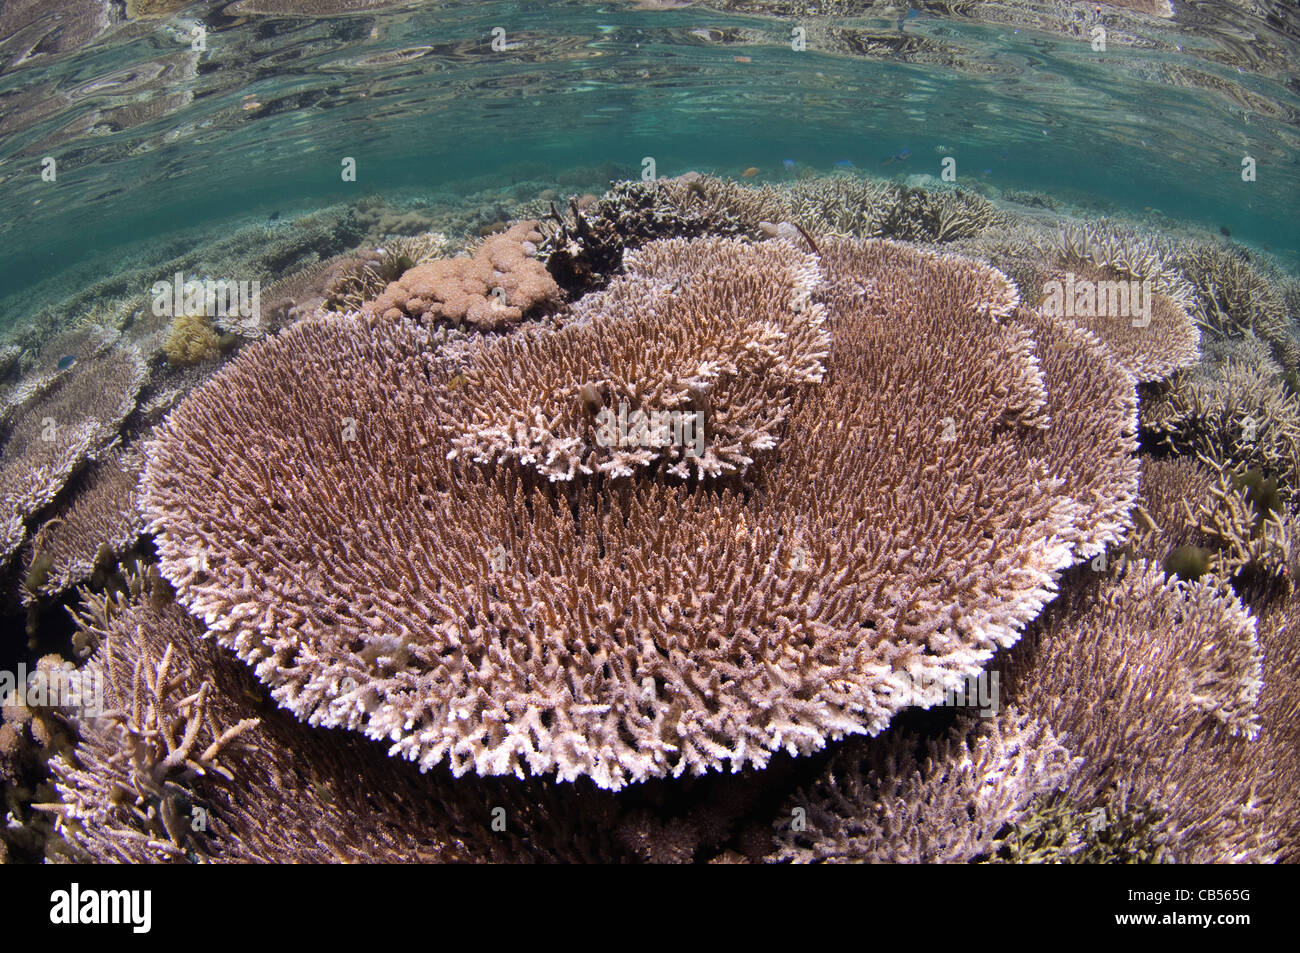 Hard coral garden with a variety of table, leather, and staghorn corals, Acropora sp., Porites sp., Litophyton sp. Stock Photo